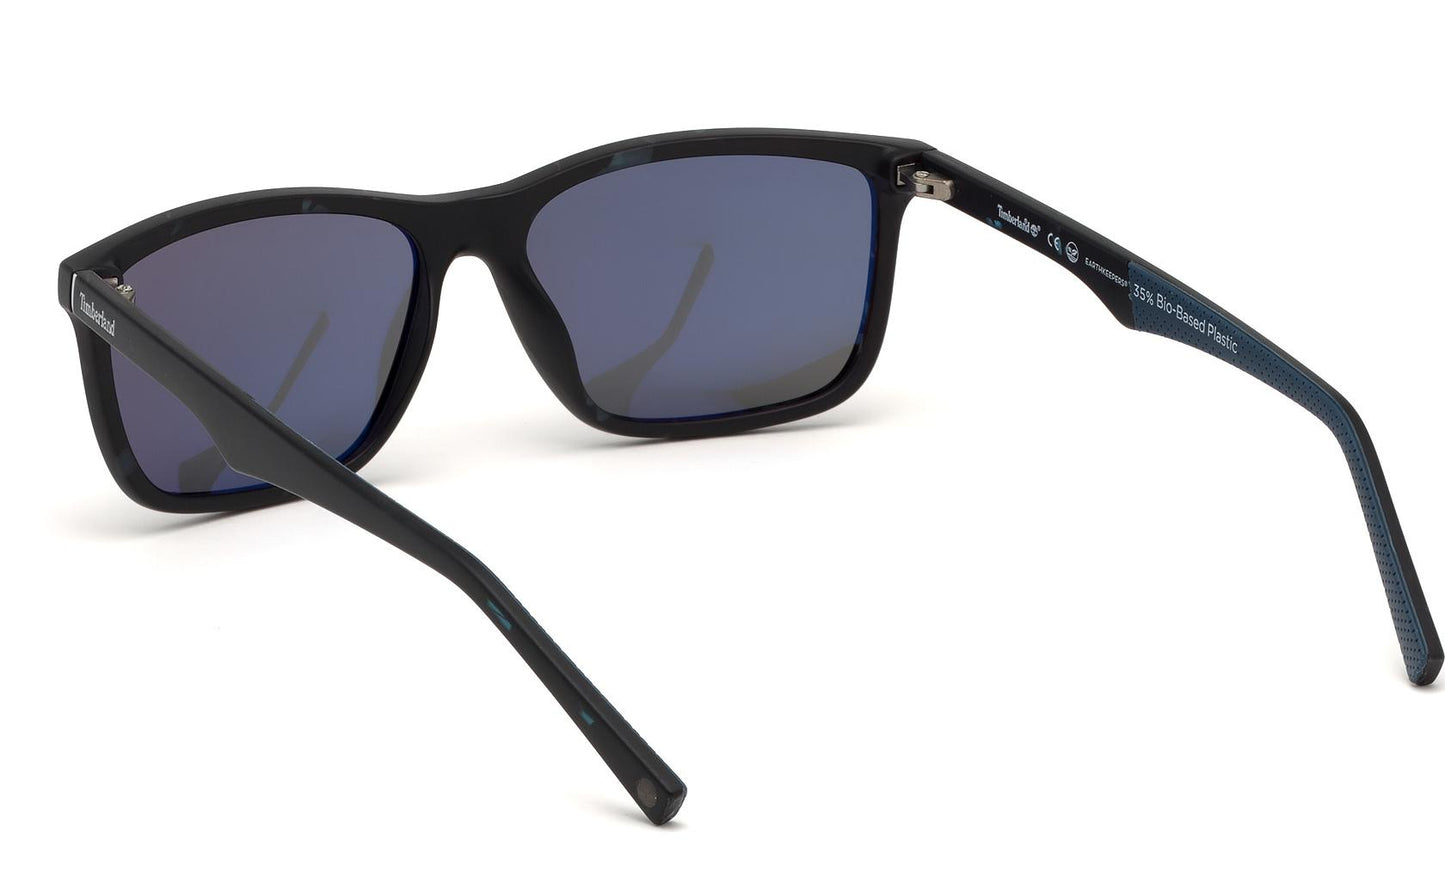 Load image into Gallery viewer, Timberland Sunglasses TB9174 55D
